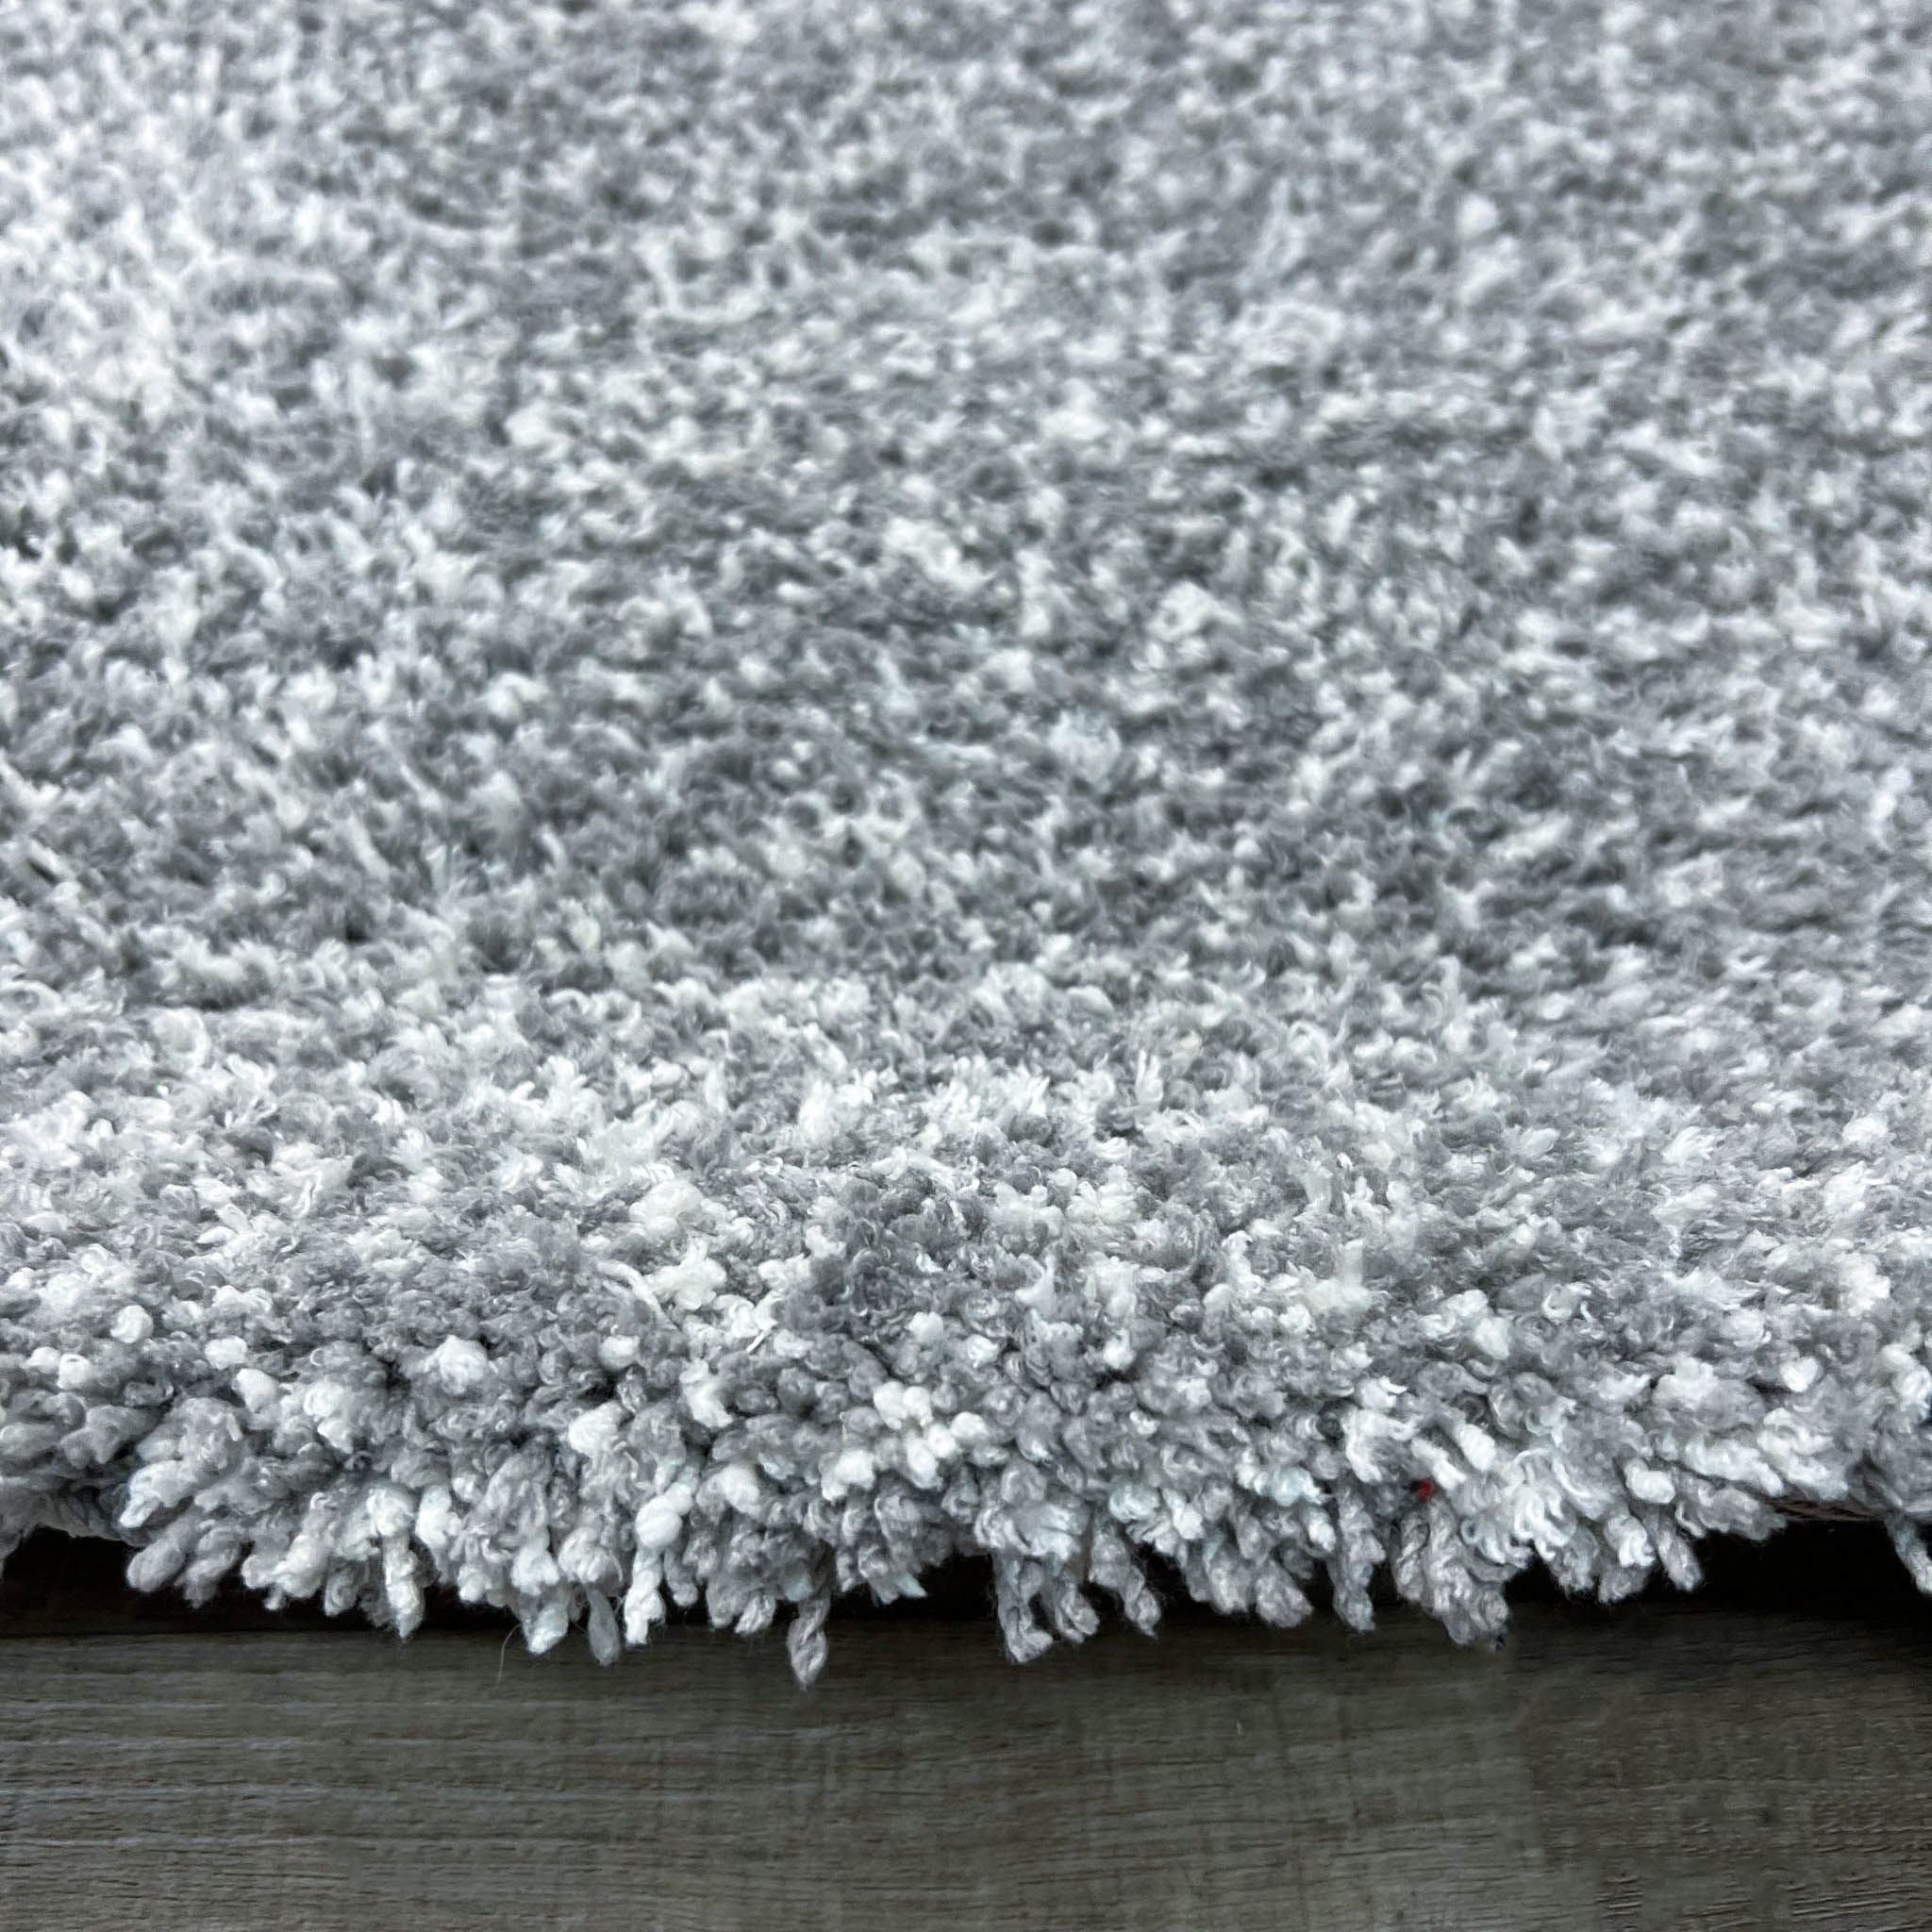 2. Close-up of the Bliss rug by KAS, emphasizing the dense, soft polyester weave and its stain-resistant feature for lasting beauty in a home setting.